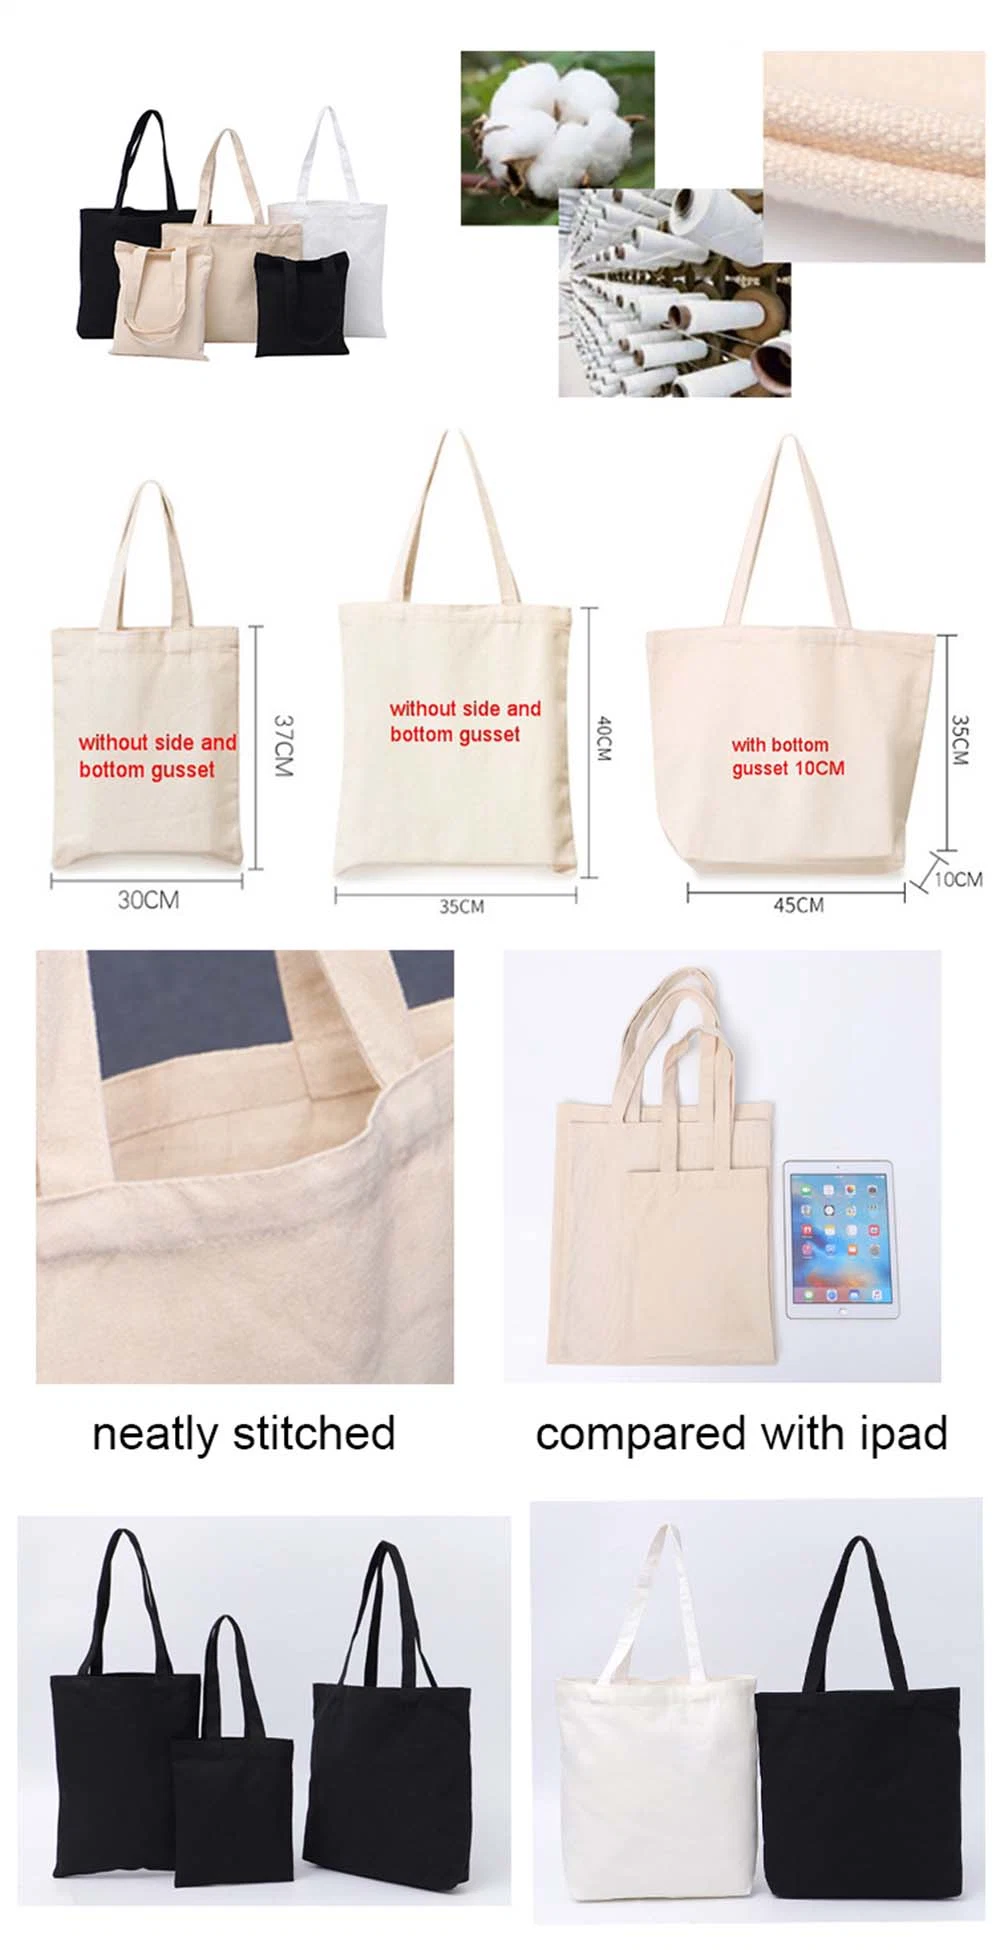 Custom Printed Cotton Canvas Tote Bag for Office, School, and Shopping